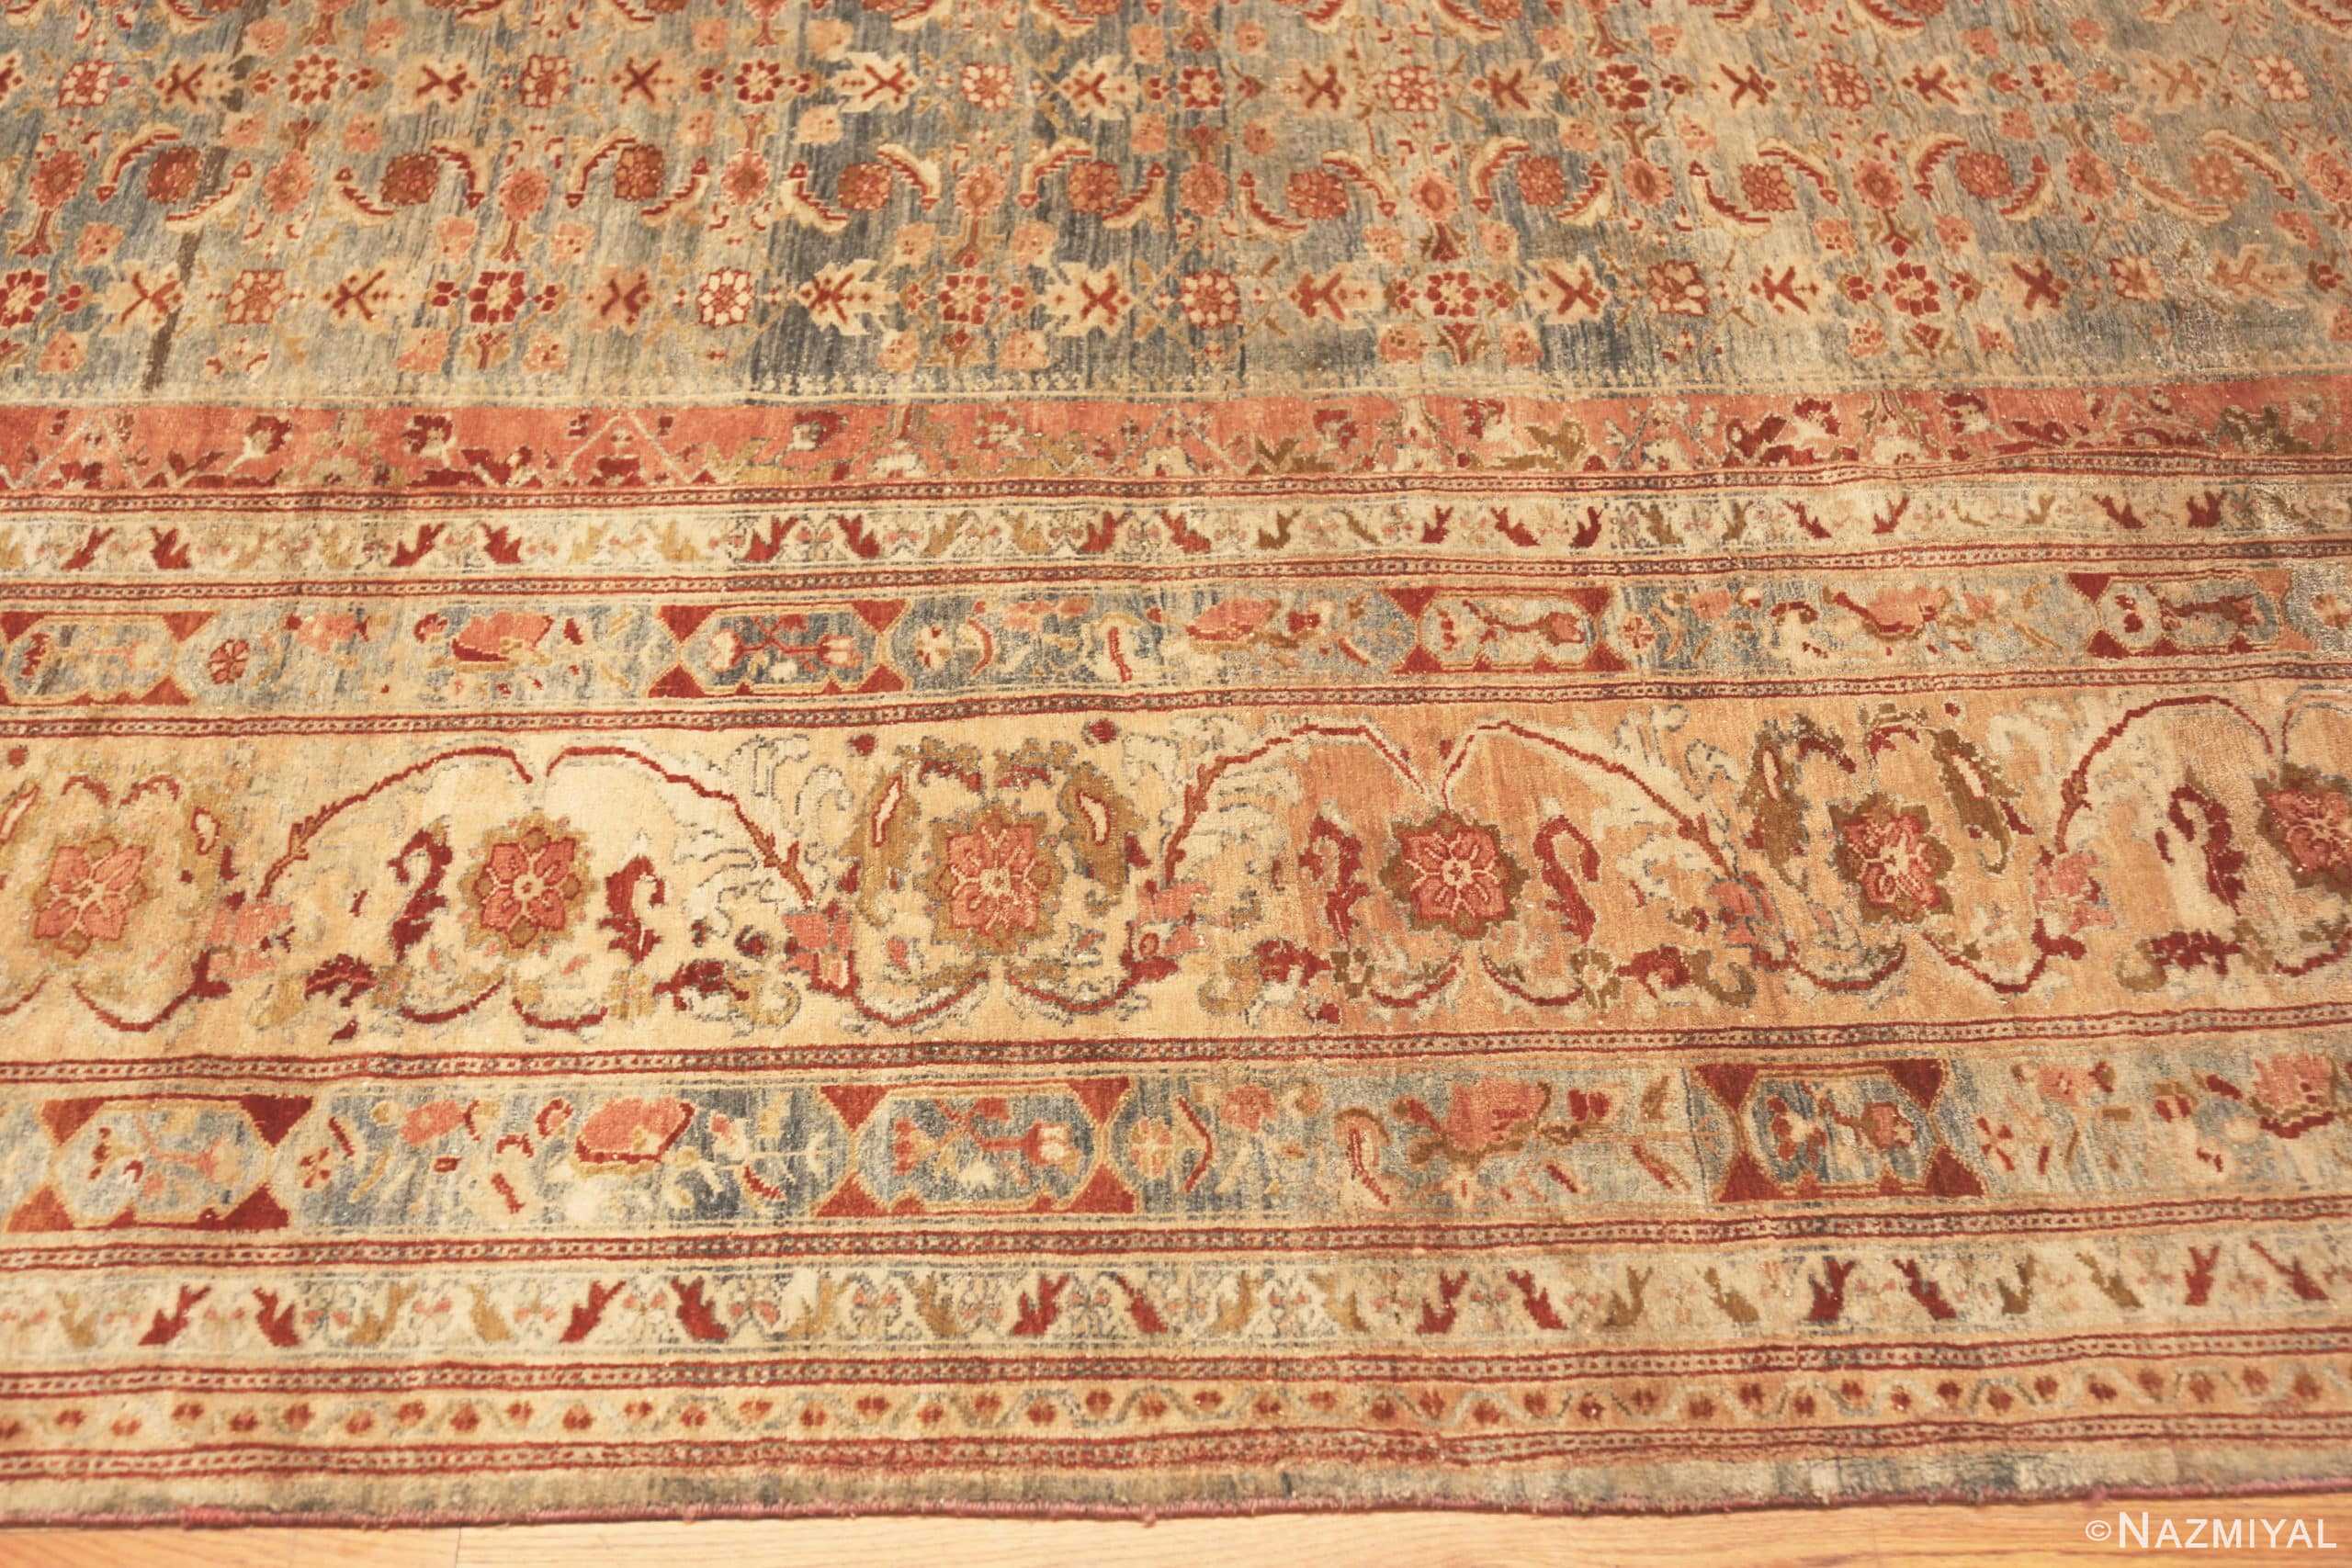 Border Of Large Light Blue Background Antique Persian Malayer Rug 71177 by Nazmiyal Antique Rugs